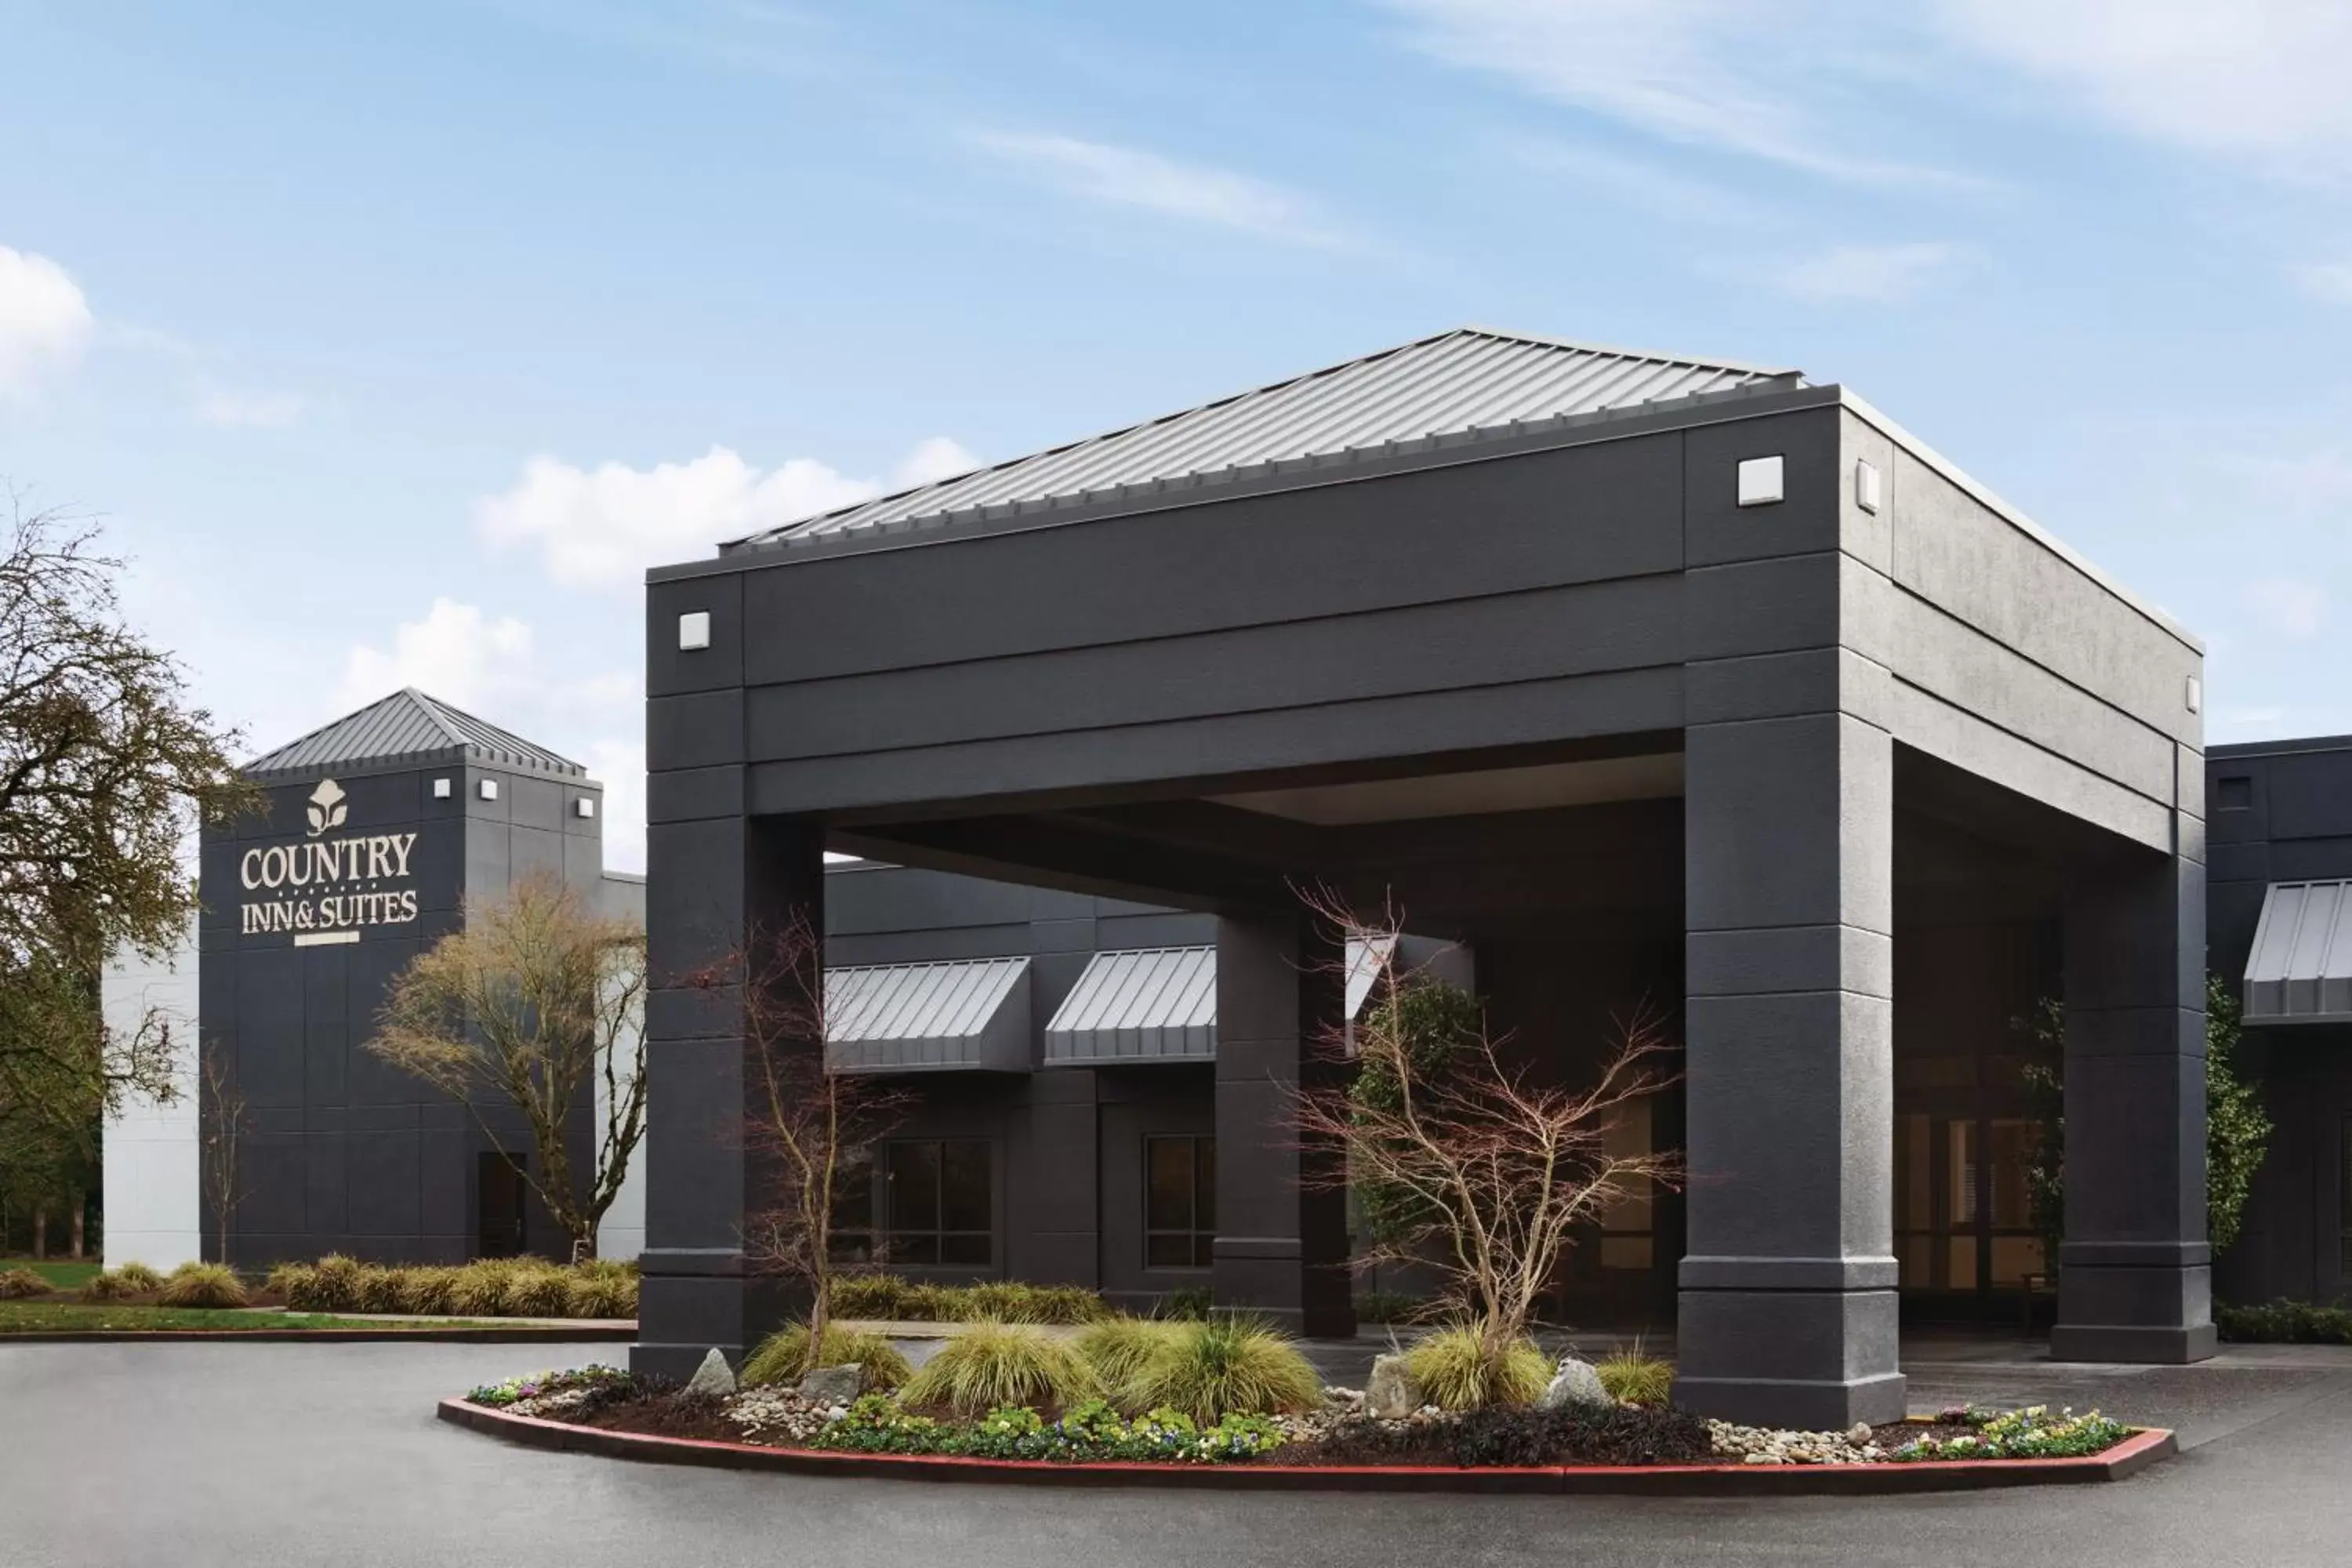 Facade/entrance, Property Building in Country Inn & Suites by Radisson, Seattle-Bothell, WA